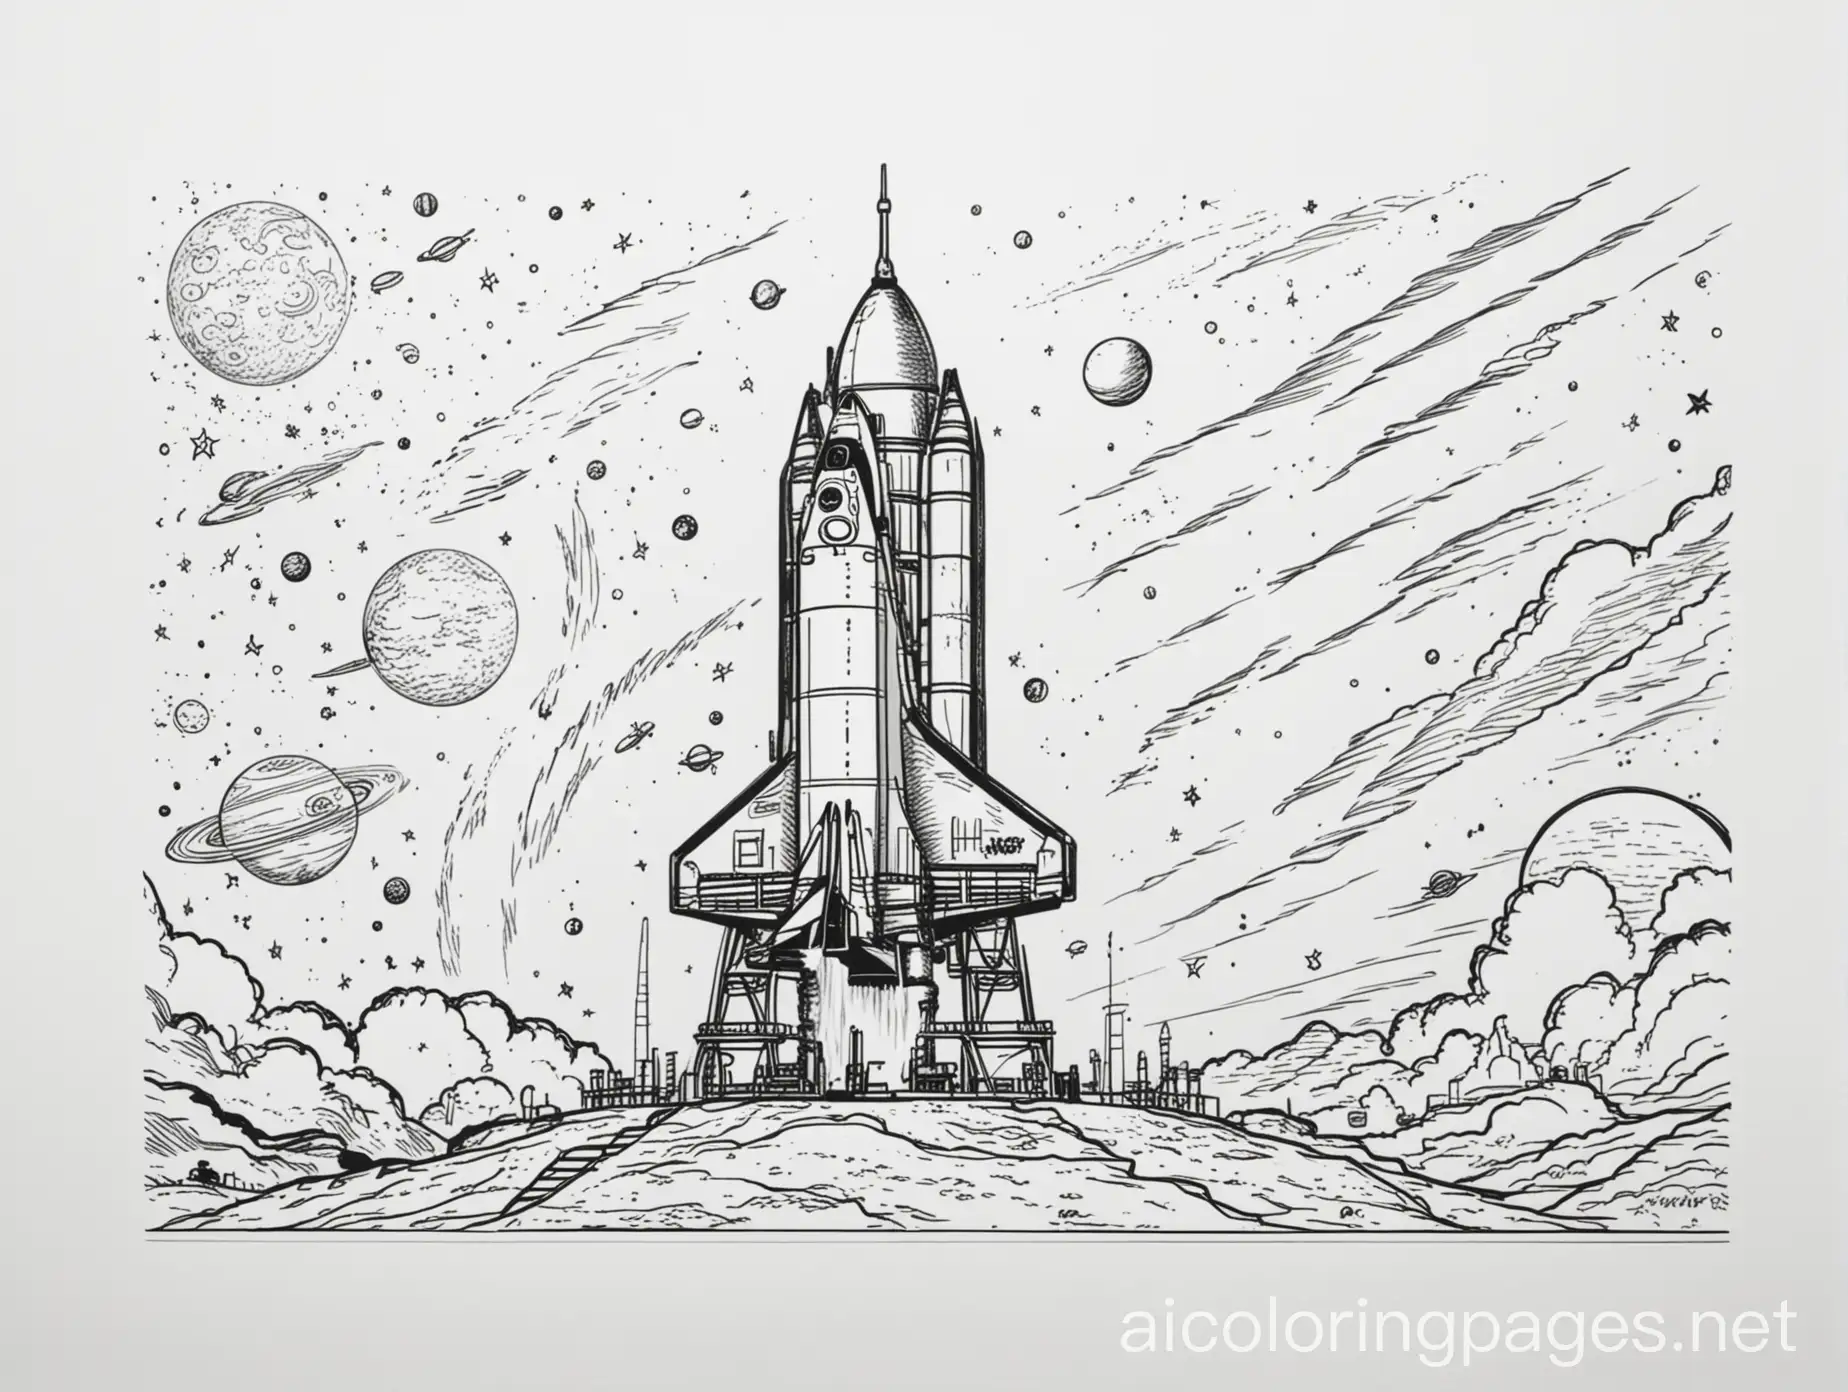 Prompt  A rocket launch pad ready for lift-off, coloring page, black and white, line art, white background, Simplicity, Ample White Space. The background of the coloring page is plain white to make it easier for children to color within the lines. The outlines of all the subjects are easy to distinguish, making it simple for kids to color without too much difficulty. There should be planets on the background to color. Background should be similar to white paper., Coloring Page, black and white, line art, white background, Simplicity, Ample White Space. The background of the coloring page is plain white to make it easy for young children to color within the lines. The outlines of all the subjects are easy to distinguish, making it simple for kids to color without too much difficulty